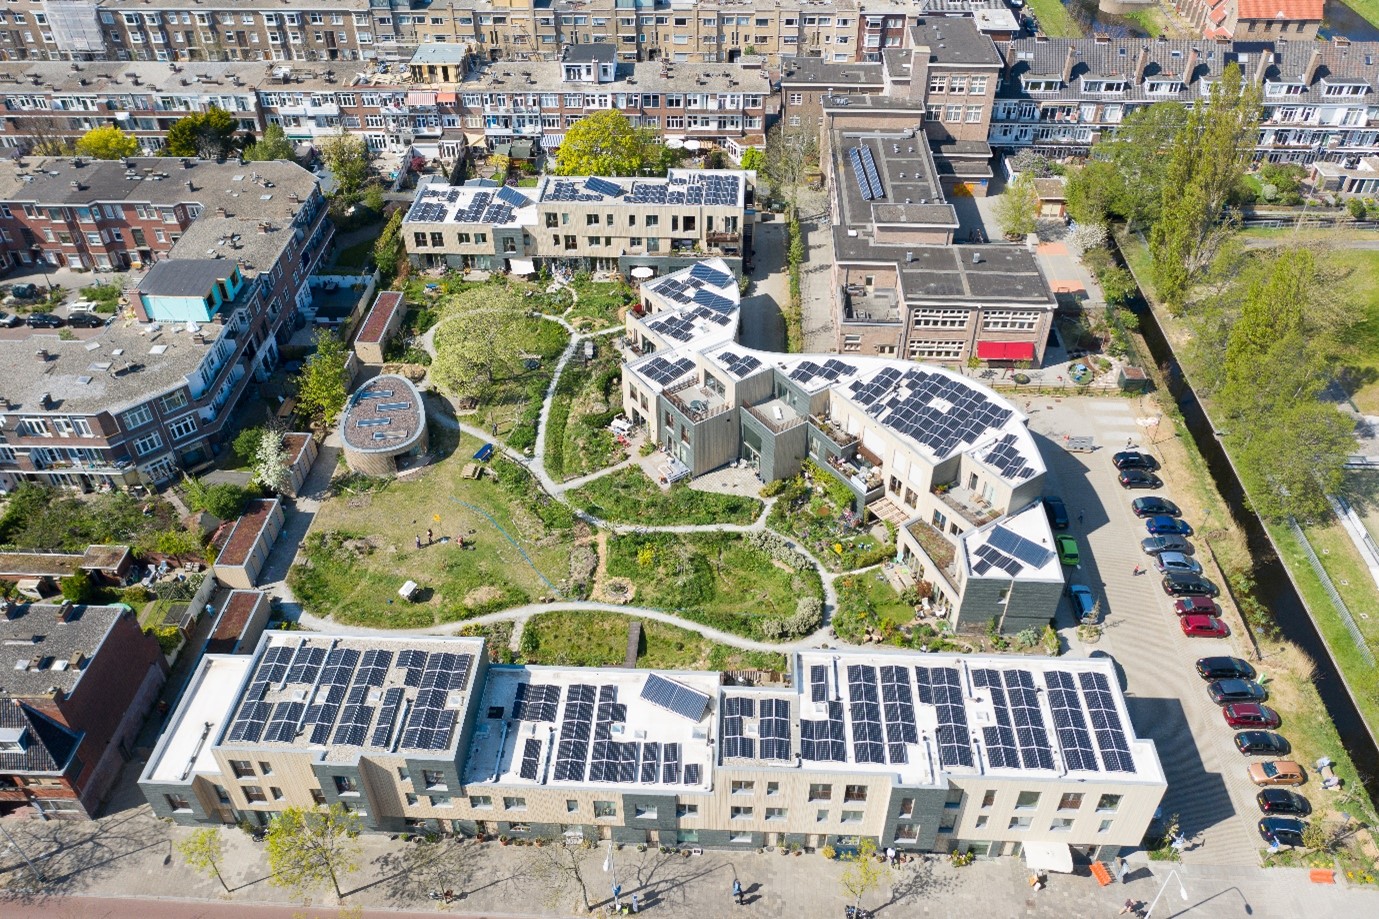 Aerial photograph of 'Groene Mient', a neighbourhood in The Hague where experiments with sustainable energy technology are ongoing